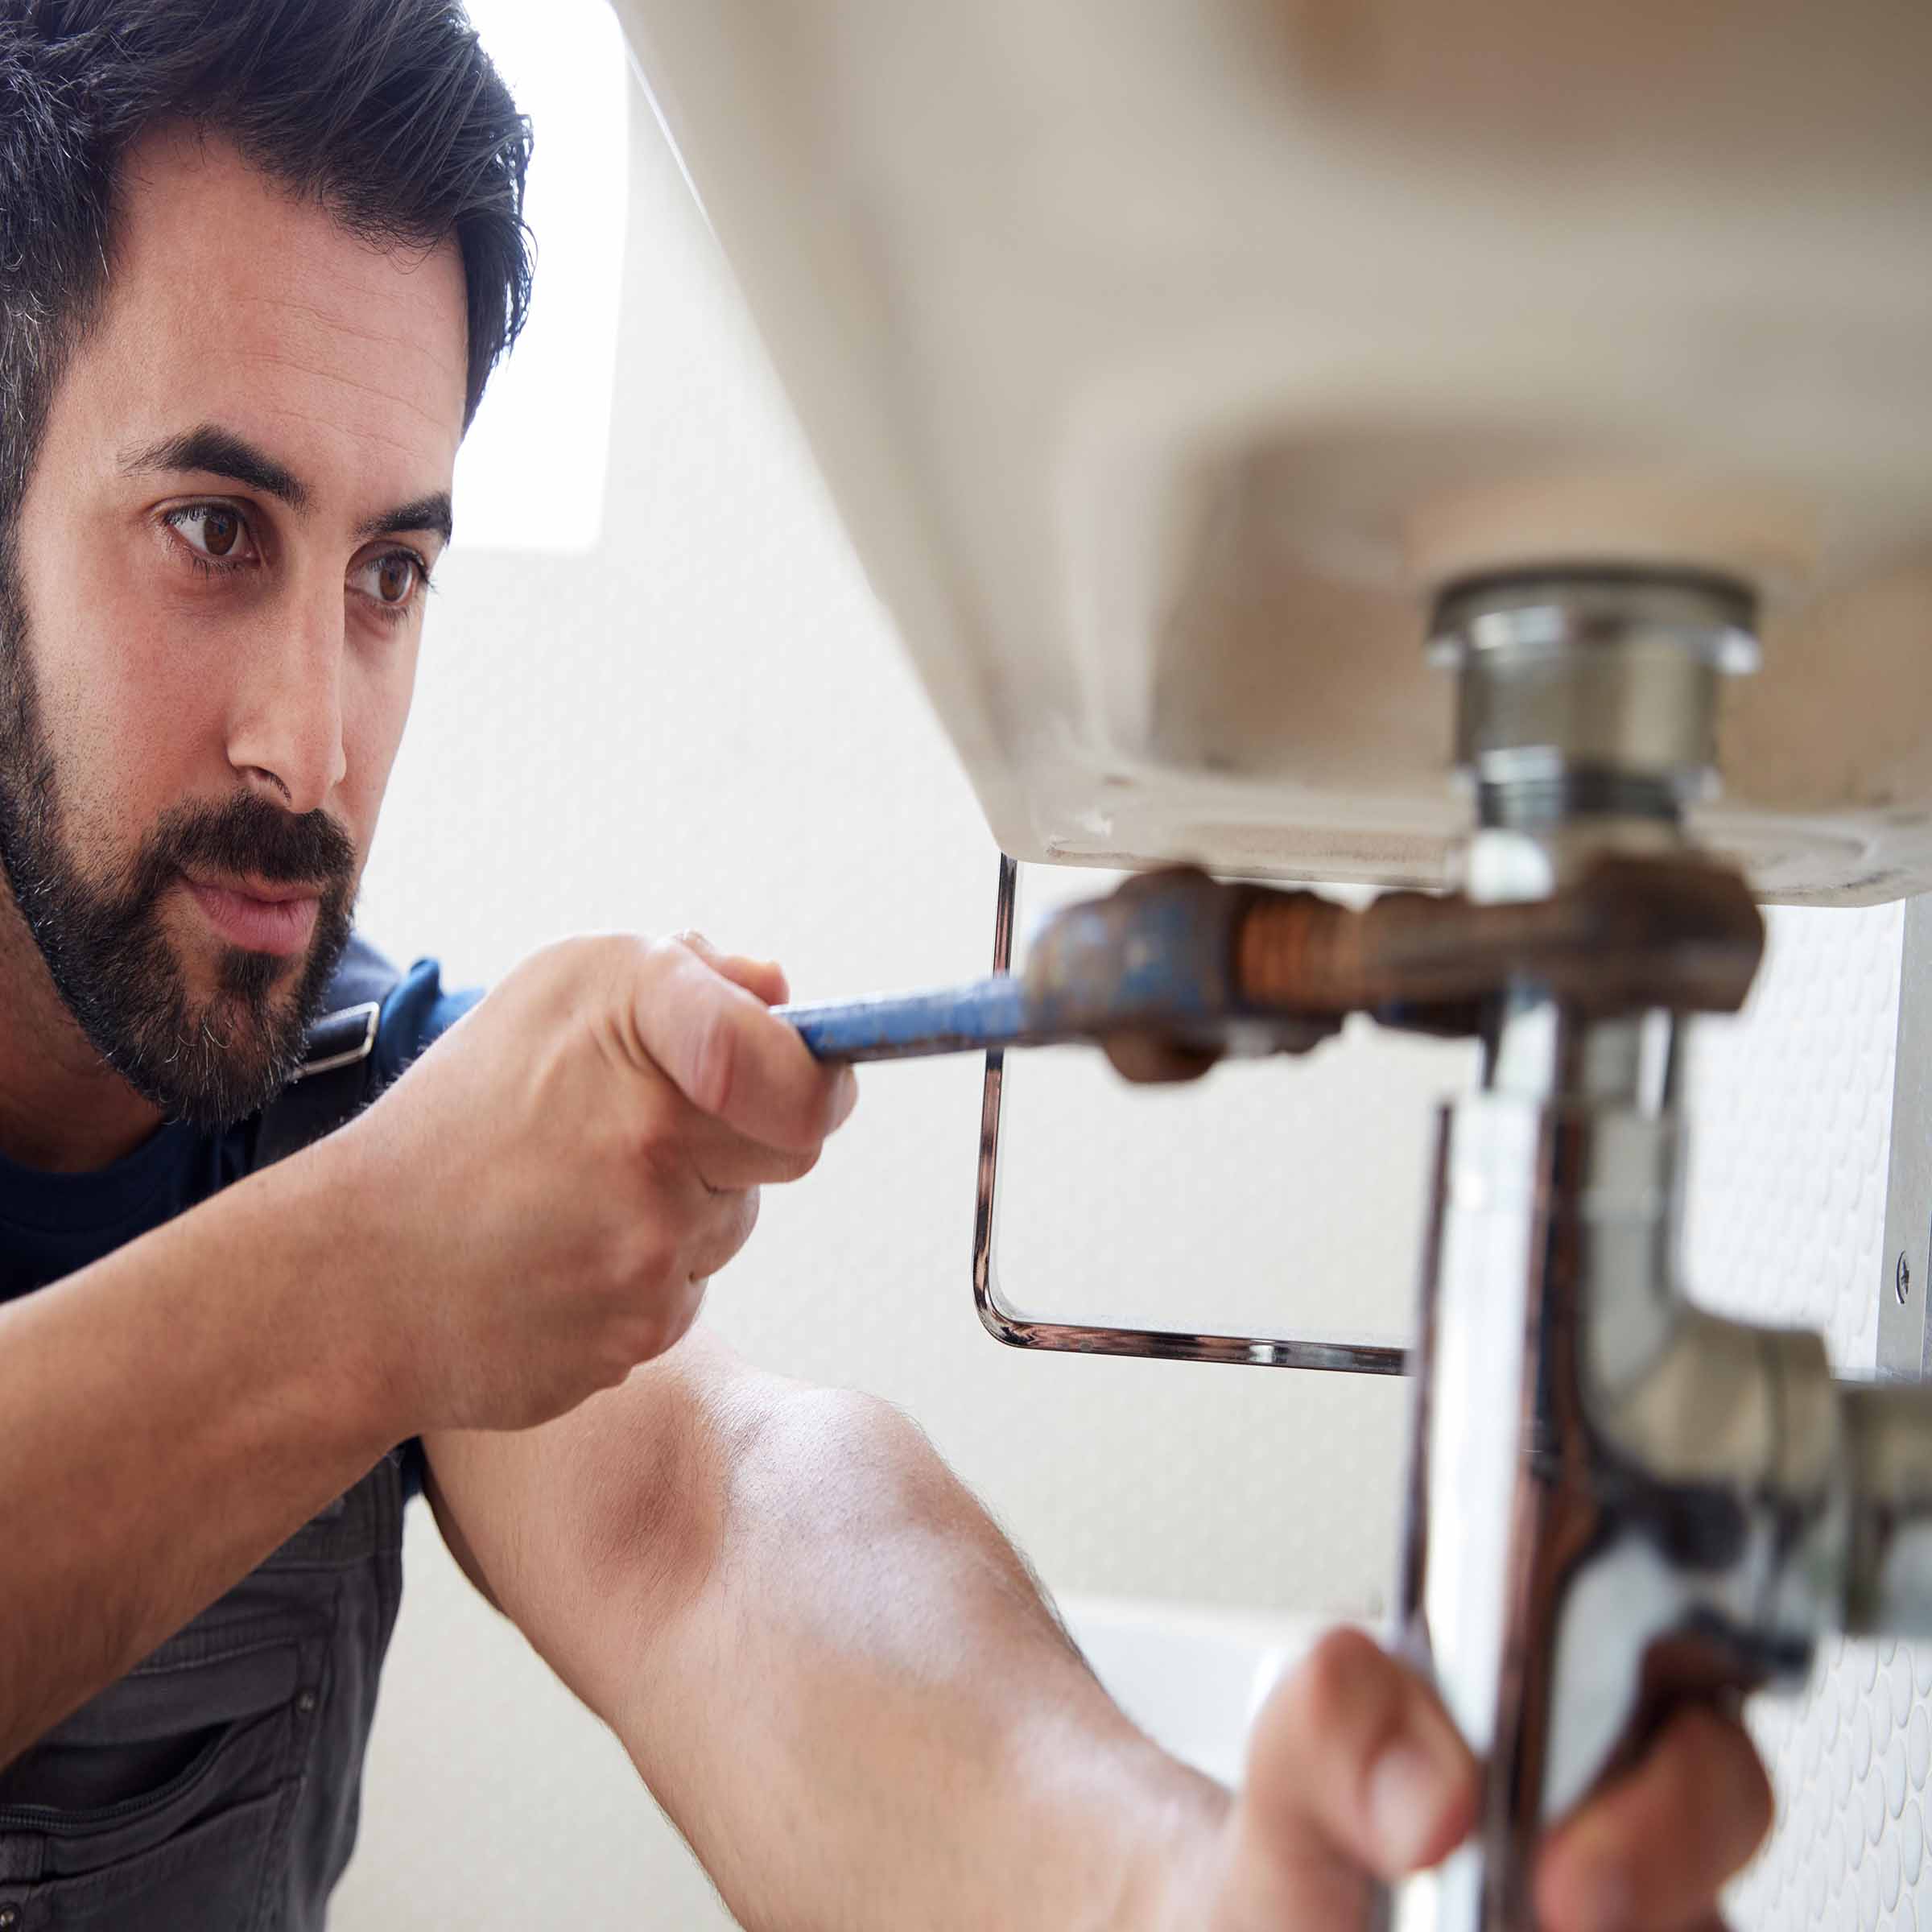 Who Installs Electric Shower Plumber Or Electrician